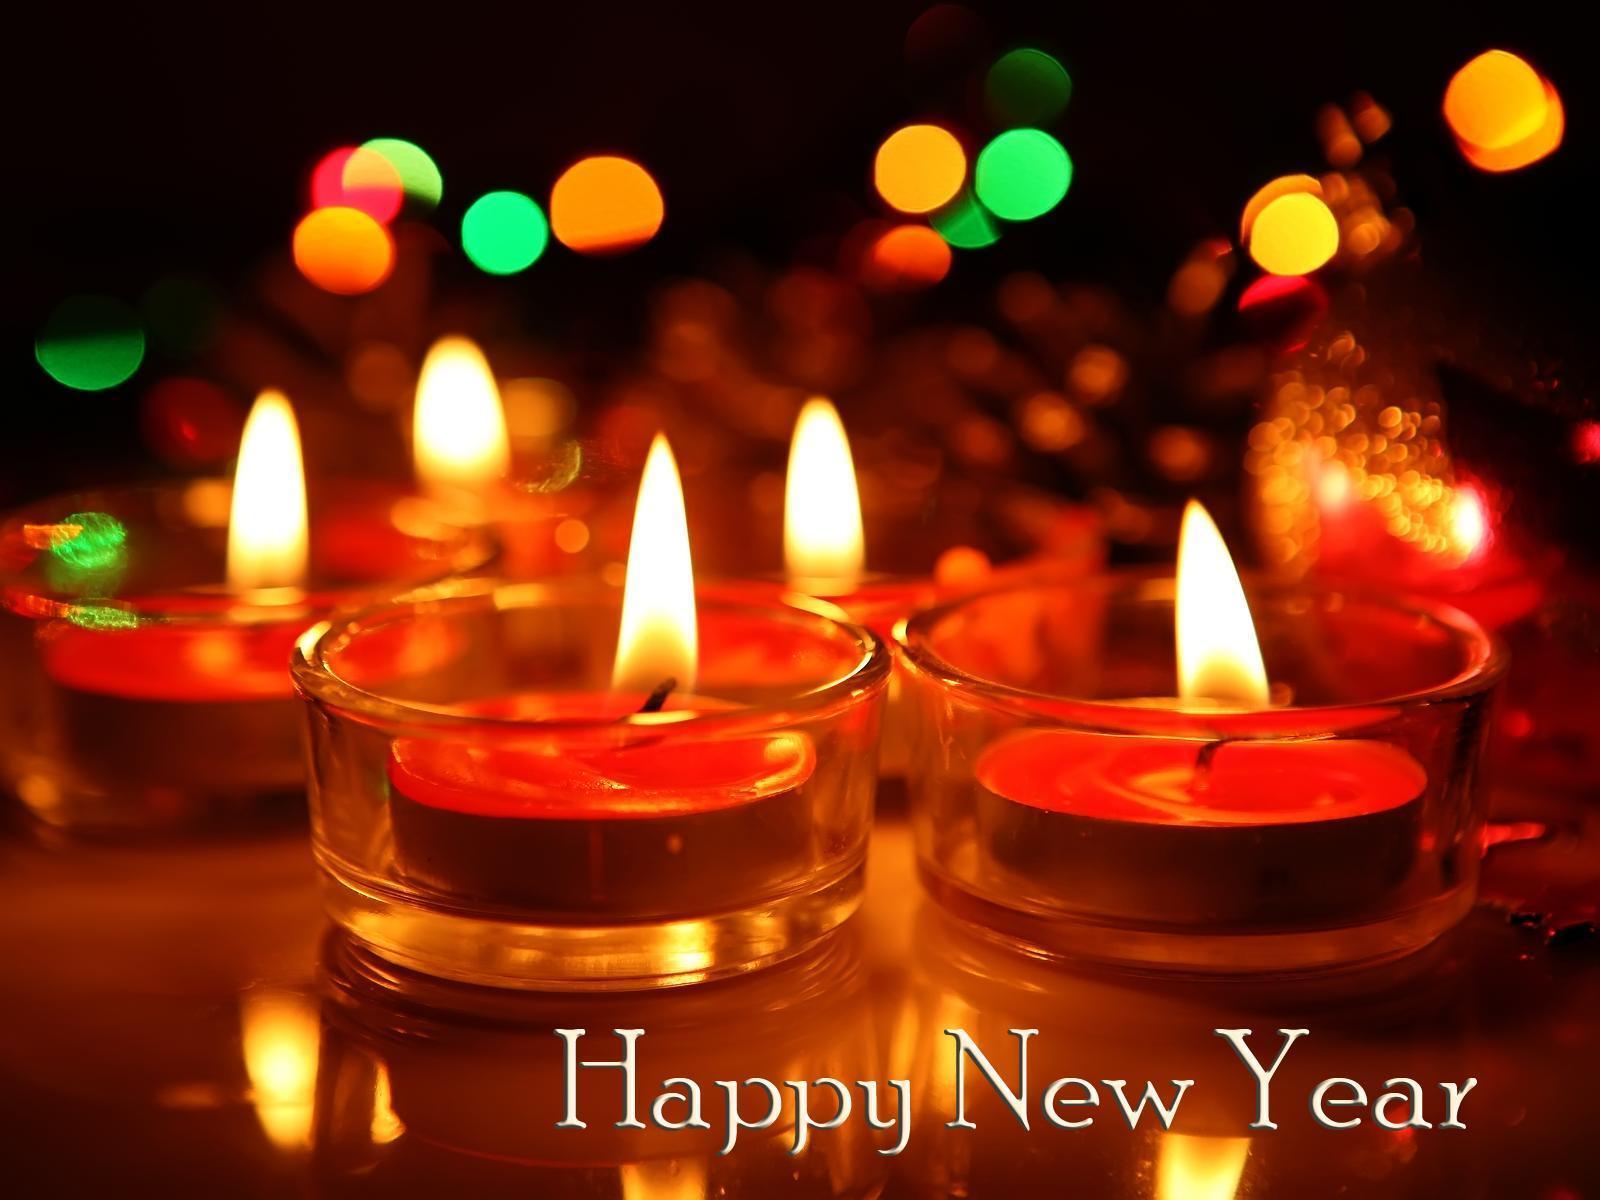 Happy New Year 2015 Wishes, Greetings, sms, wallpaper. Pakistani